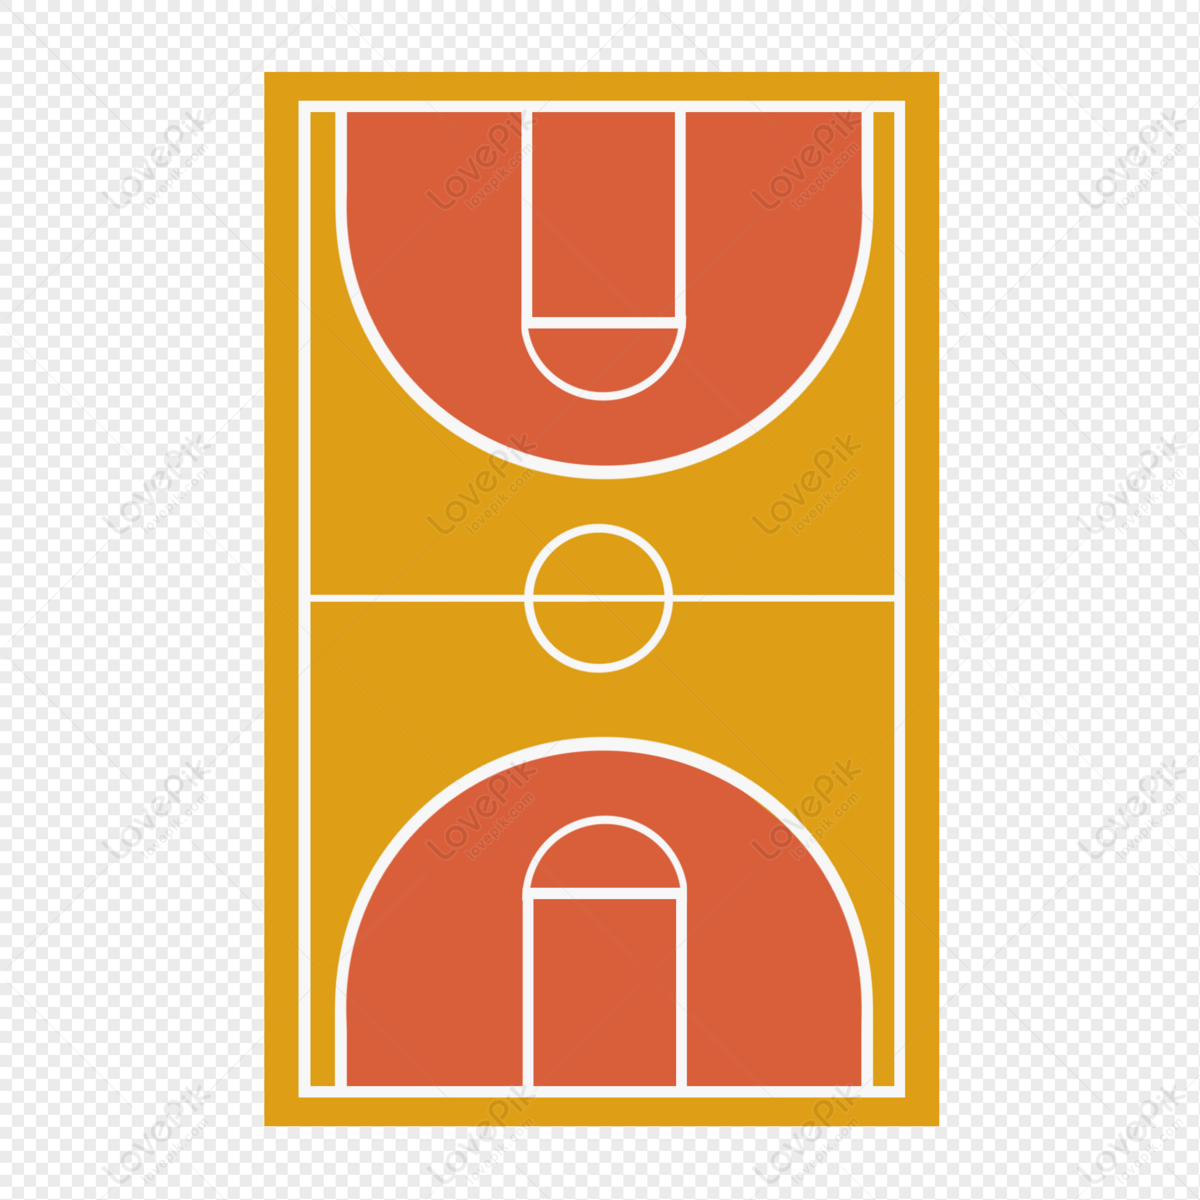 Basketball Court PNG Transparent Background And Clipart Image For Free  Download - Lovepik | 401339120